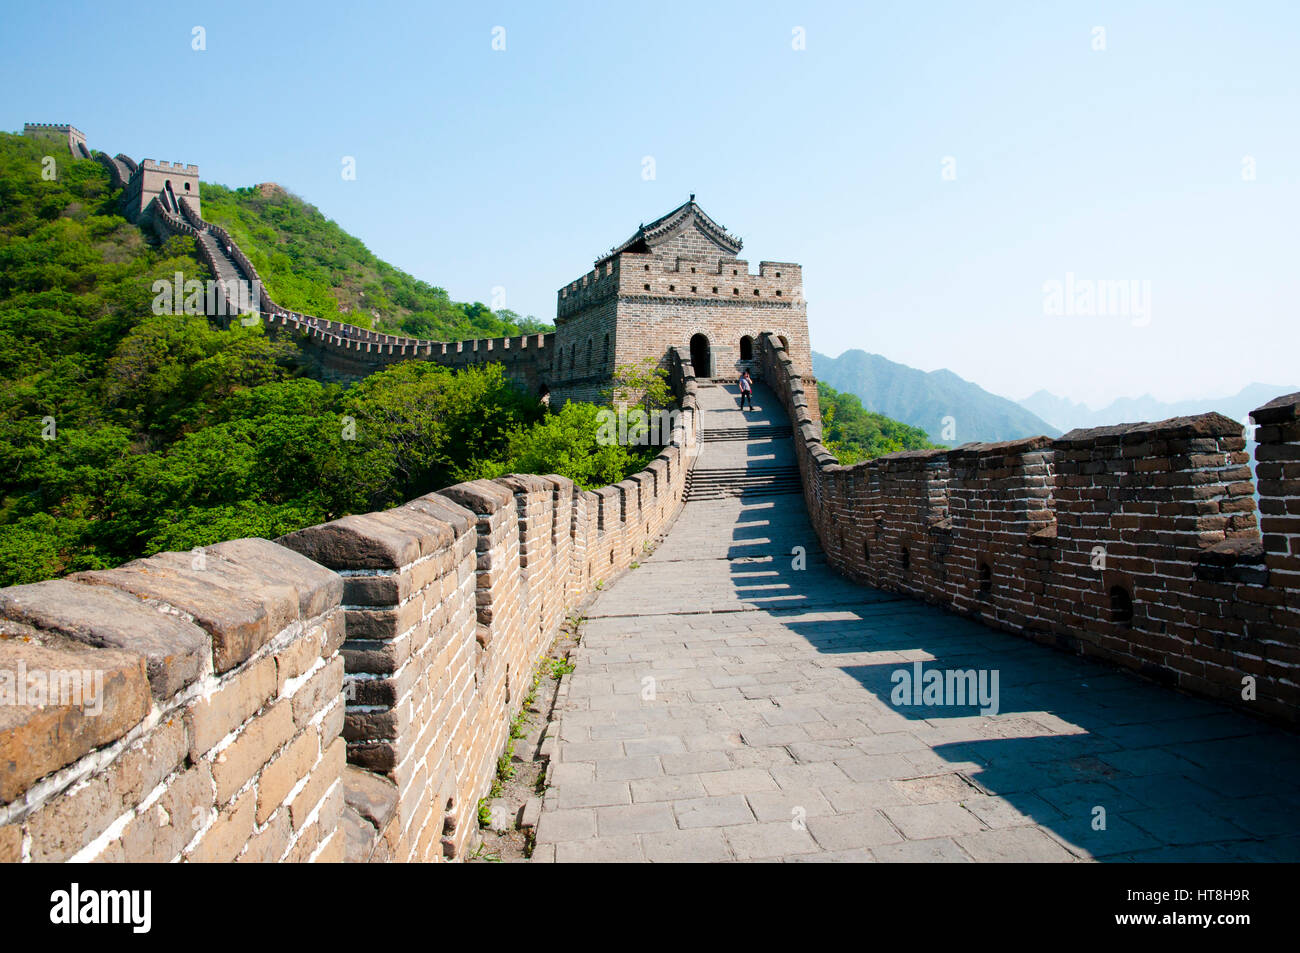 Mutianyu Section of the Great Wall of China Stock Photo